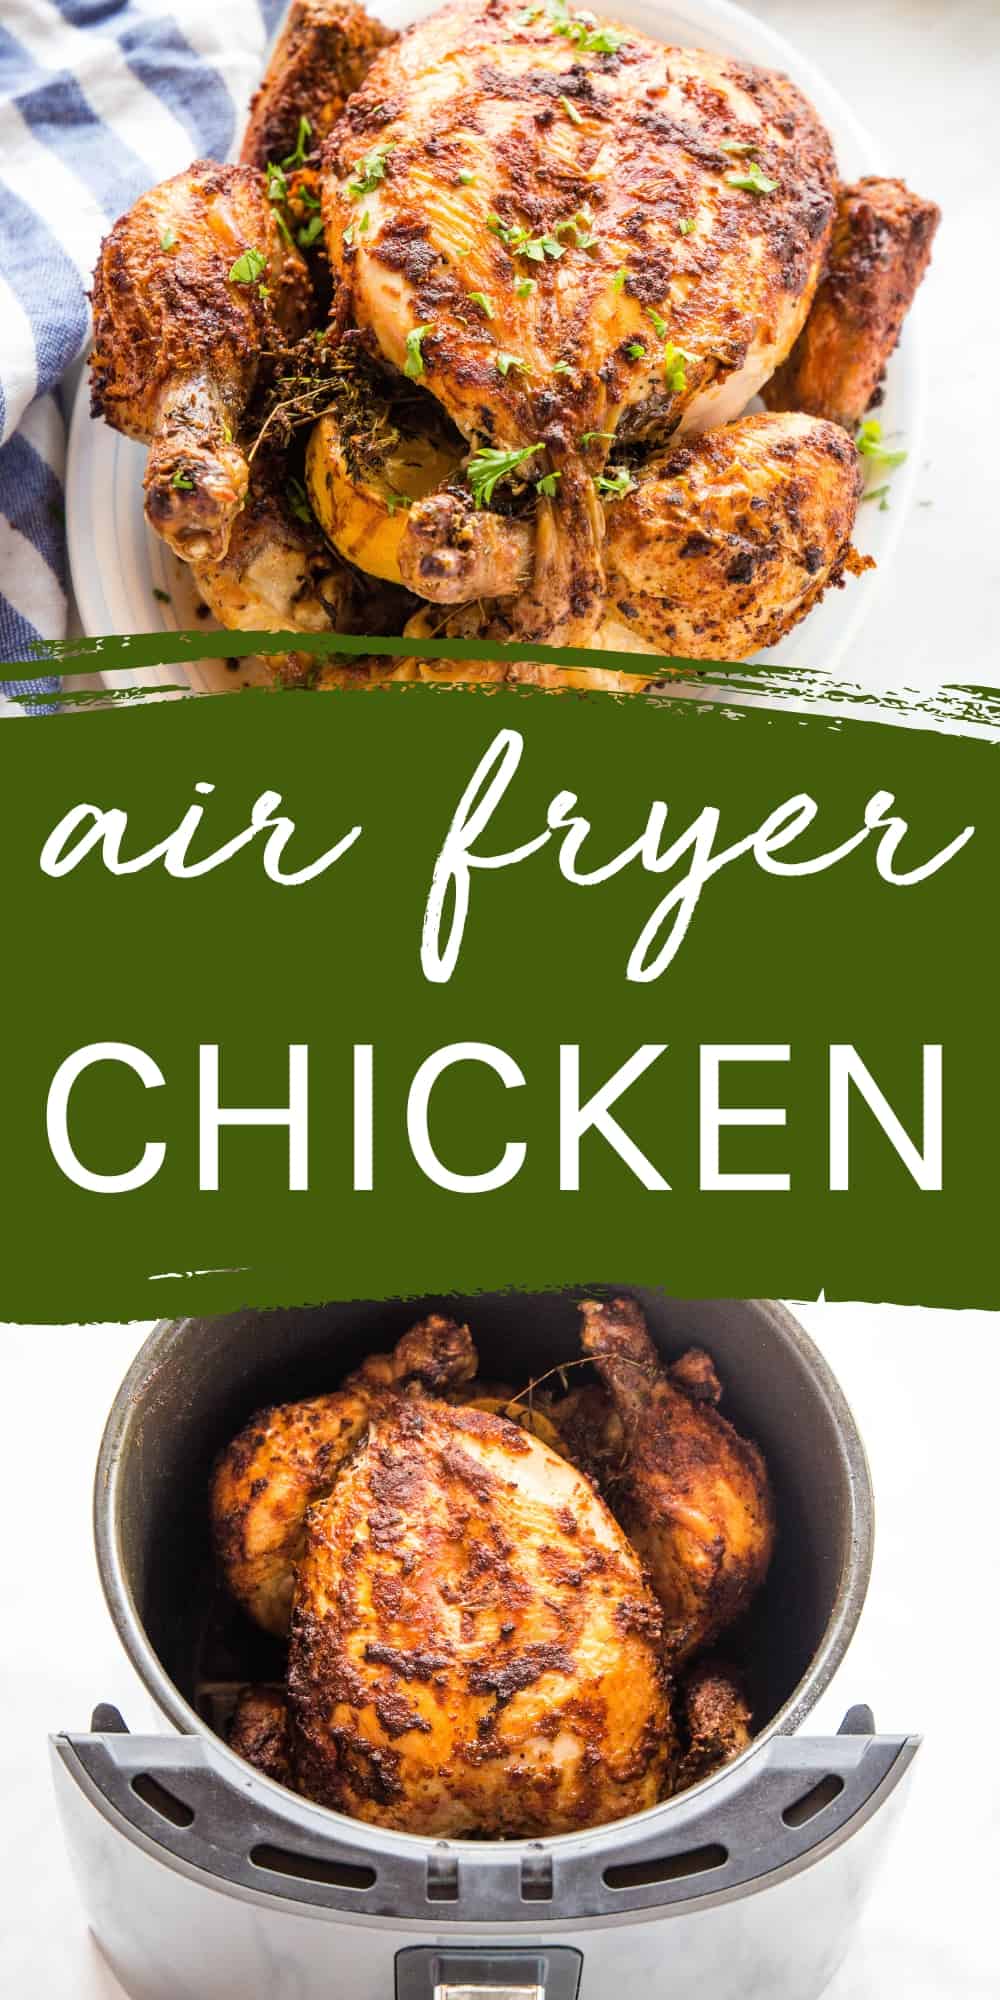 This Air Fryer Whole Chicken Recipe is the perfect easy alternative to rotisserie chicken - quick and simple to make, juicy meat and crispy skin! A super easy roast chicken recipe! Recipe from thebusybaker.ca! #roastchicken #airfryerchicken #airfryerwholechicken #airfryerroastchicken #rotisseriechicken #roastedchicken via @busybakerblog